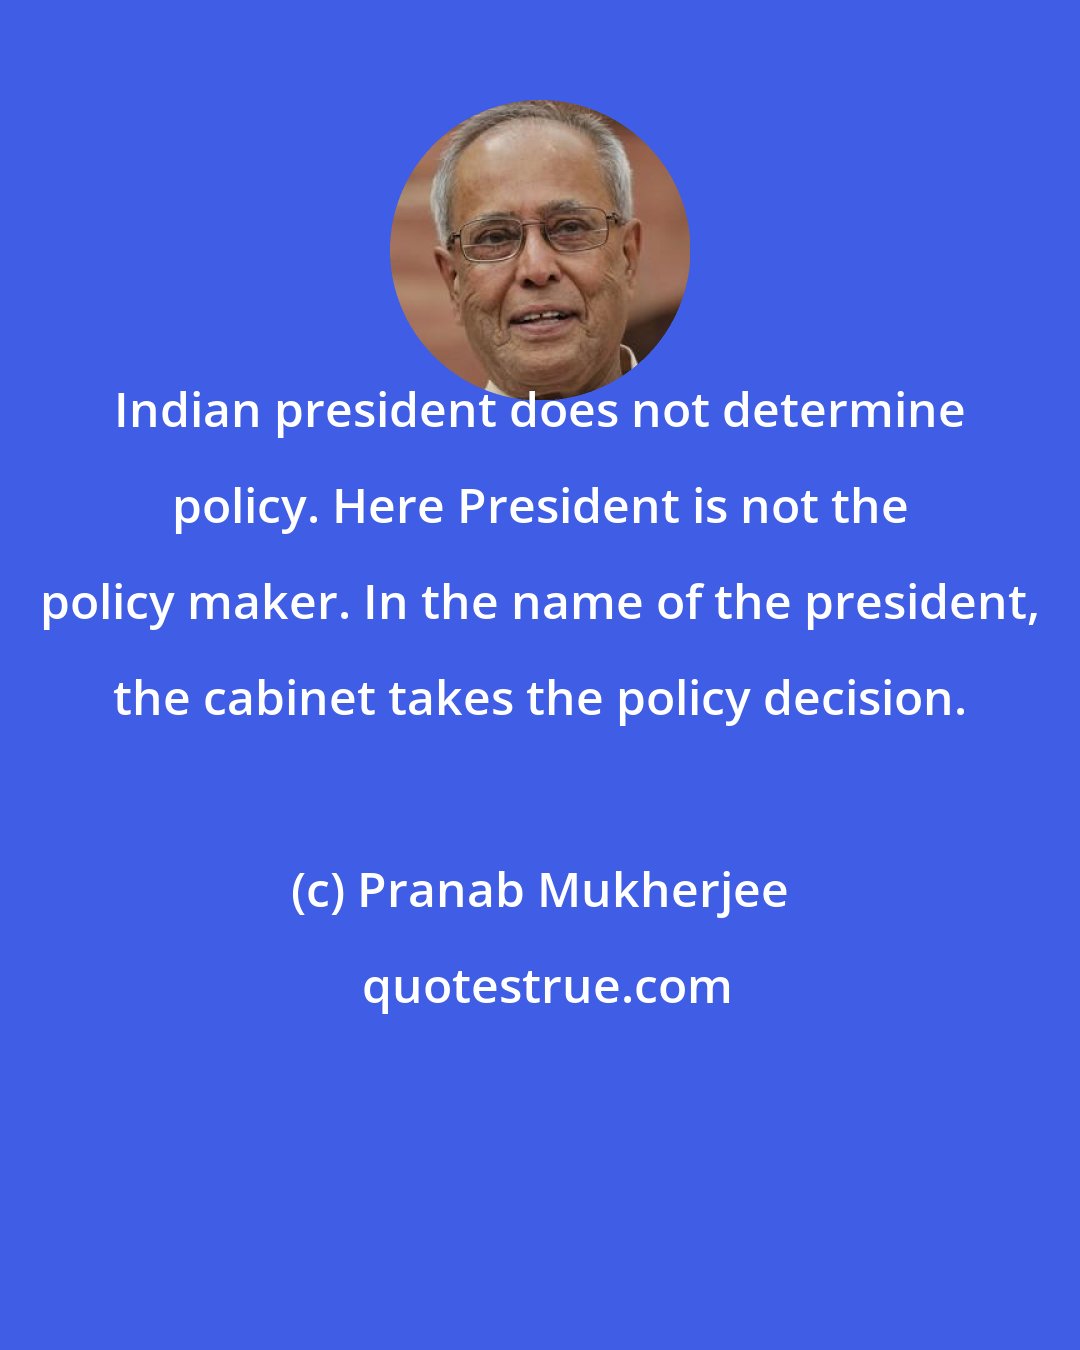 Pranab Mukherjee: Indian president does not determine policy. Here President is not the policy maker. In the name of the president, the cabinet takes the policy decision.